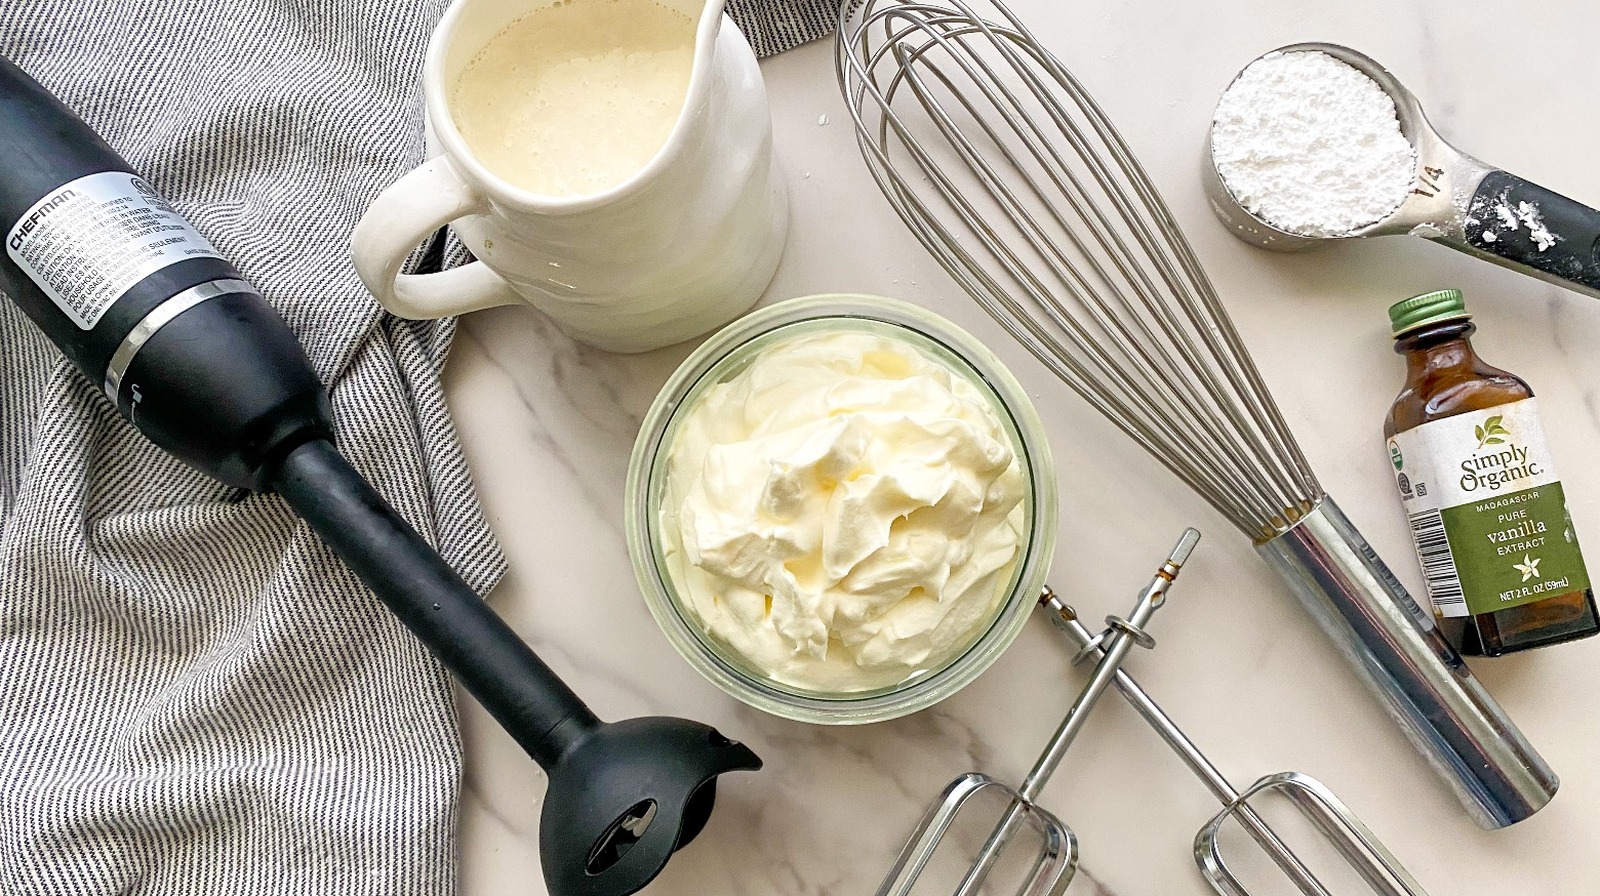 How to make whipped cream, by hand and with a hand mixer